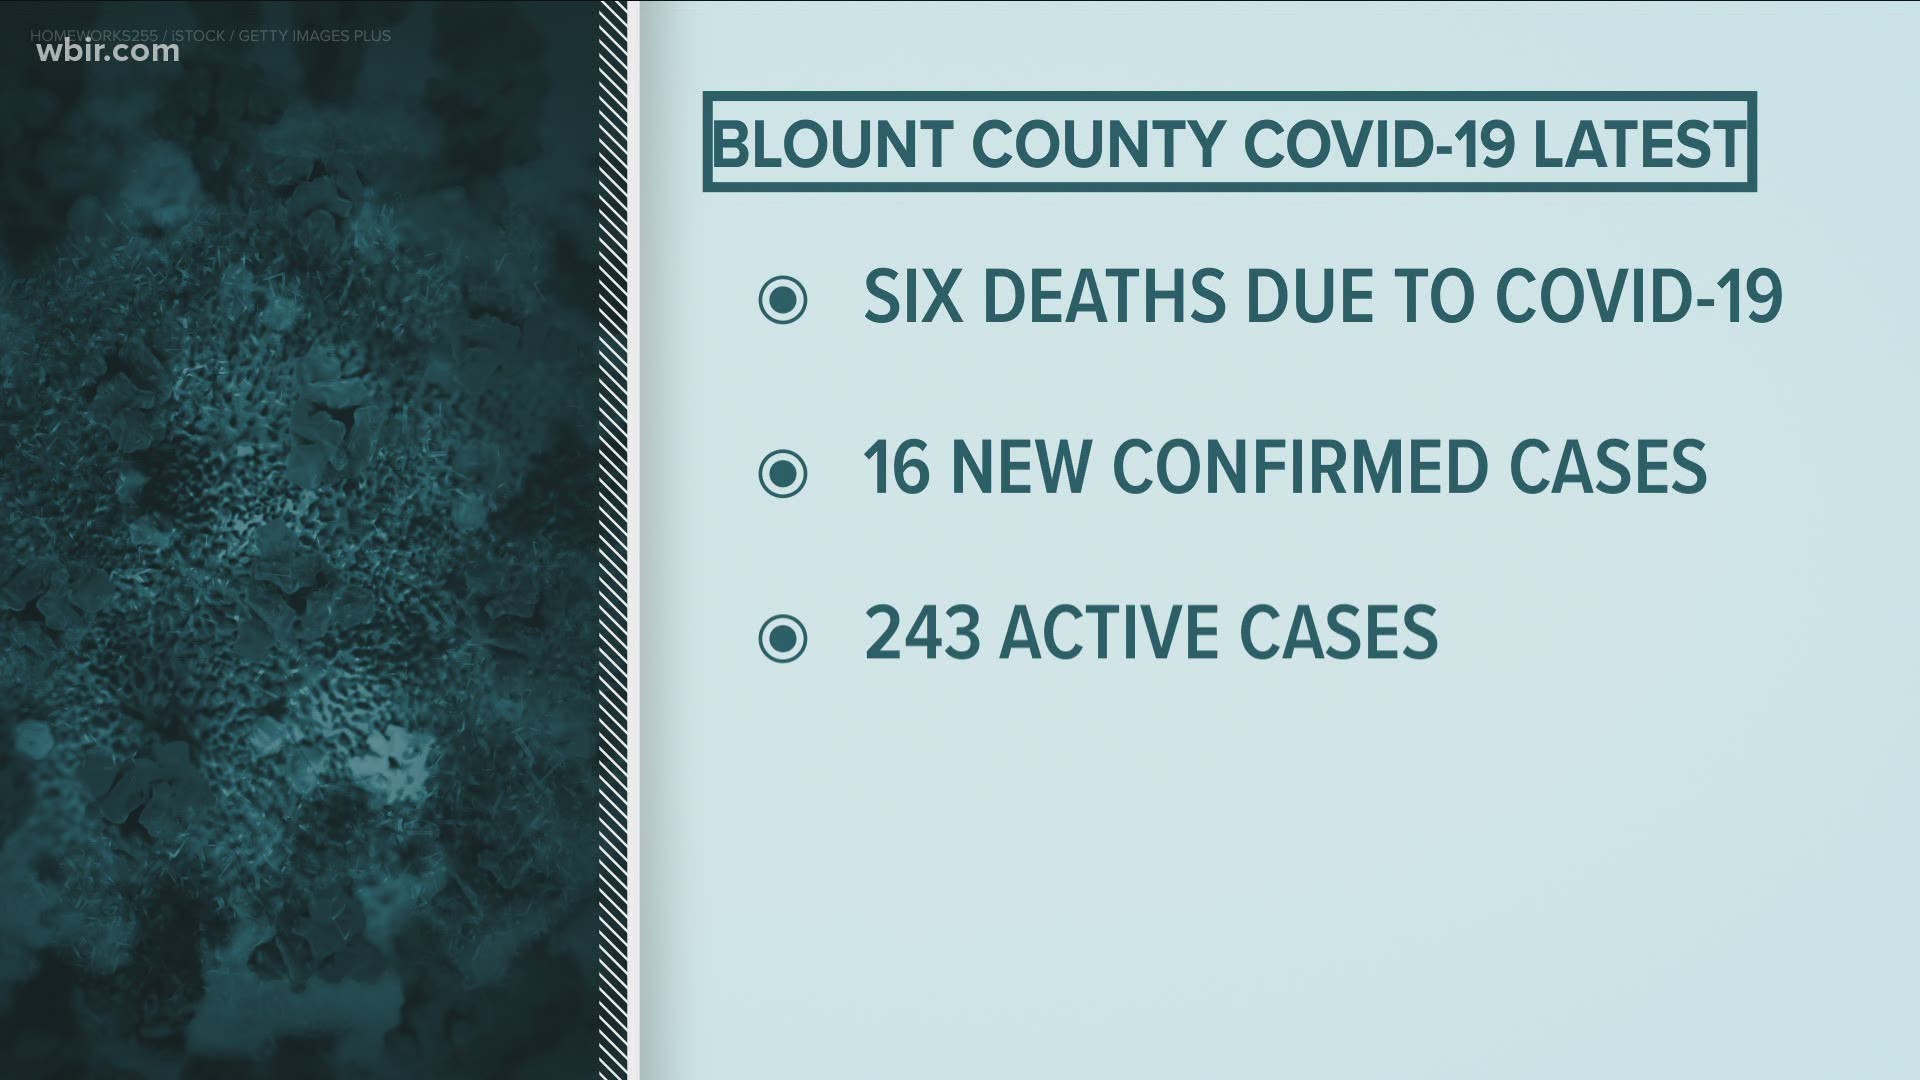 It's the largest single-day increase in the county since the state started reporting COVID-19 statistics.